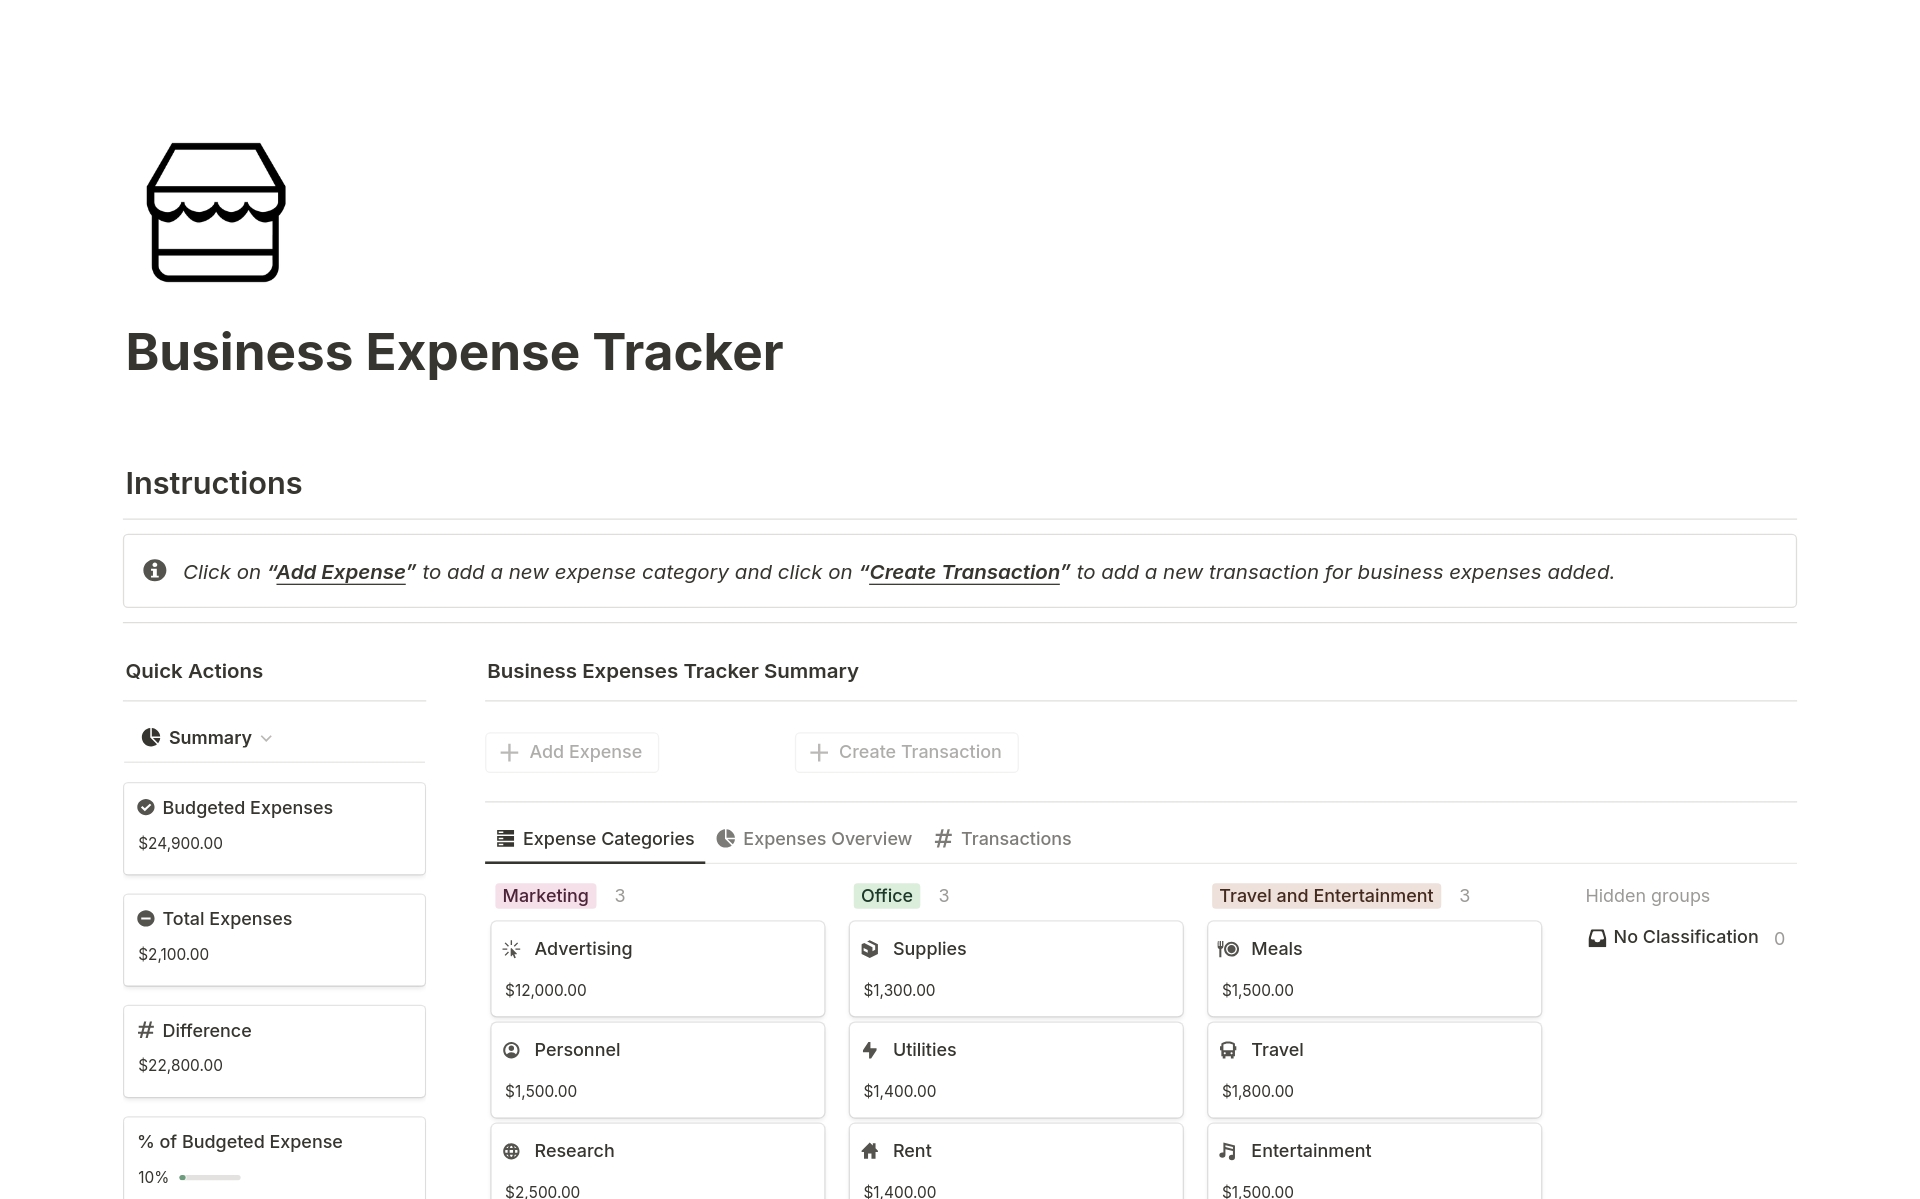 Ideal for those who manage a business, this tracker helps you keep tabs on business-related expenses such as marketing, office, travel, and much more.